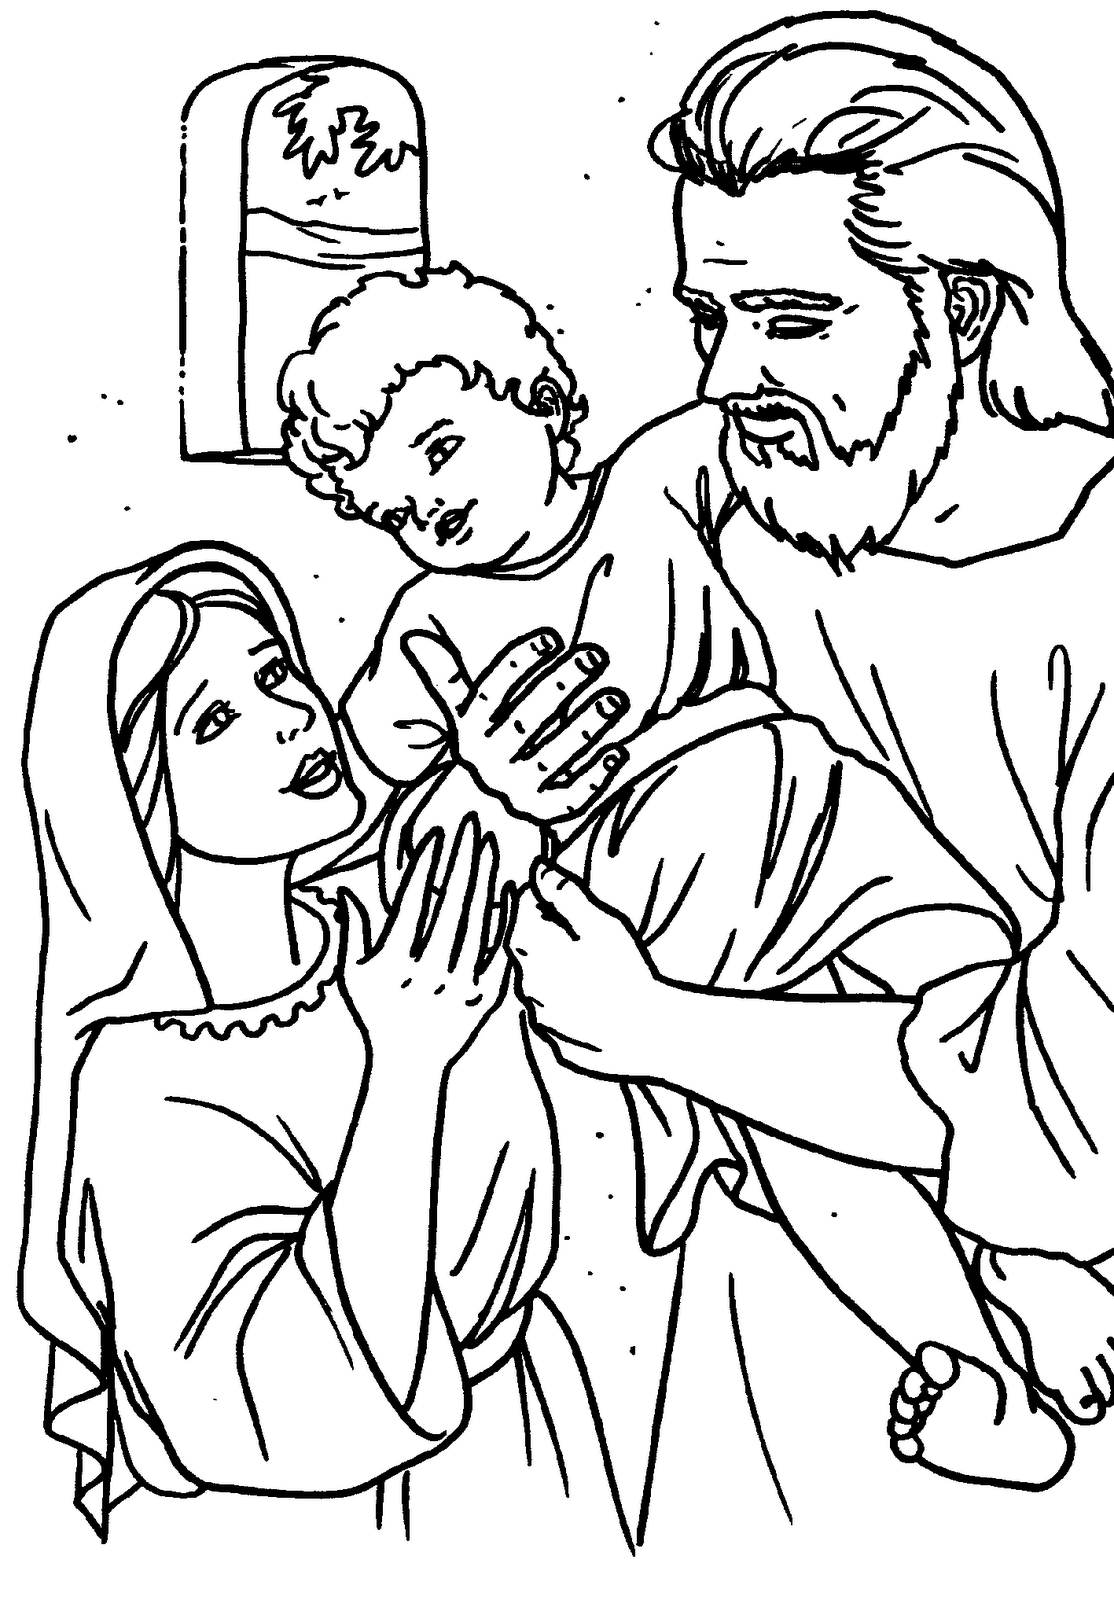 Download St. Joseph Coloring Pages - Coloring Home